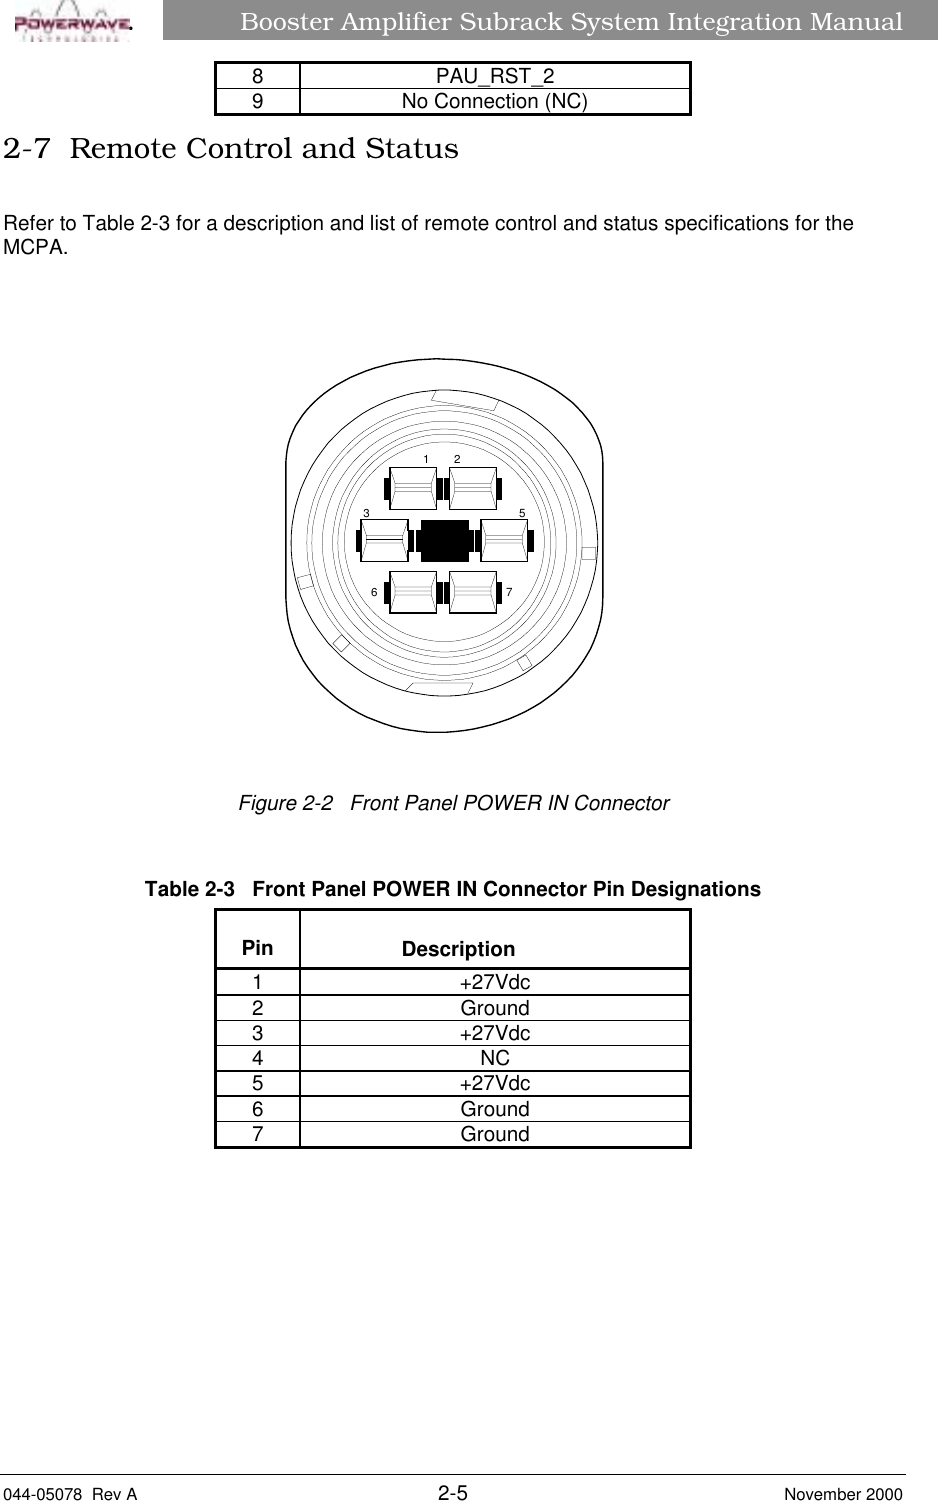 Booster Amplifier Subrack System Integration Manual044-05078  Rev A 2-5 November 2000â8 PAU_RST_29 No Connection (NC)2-7  Remote Control and StatusRefer to Table 2-3 for a description and list of remote control and status specifications for theMCPA.Figure 2-2   Front Panel POWER IN ConnectorTable 2-3   Front Panel POWER IN Connector Pin DesignationsPin Description1 +27Vdc2 Ground3 +27Vdc4NC5 +27Vdc6 Ground7 Ground235671